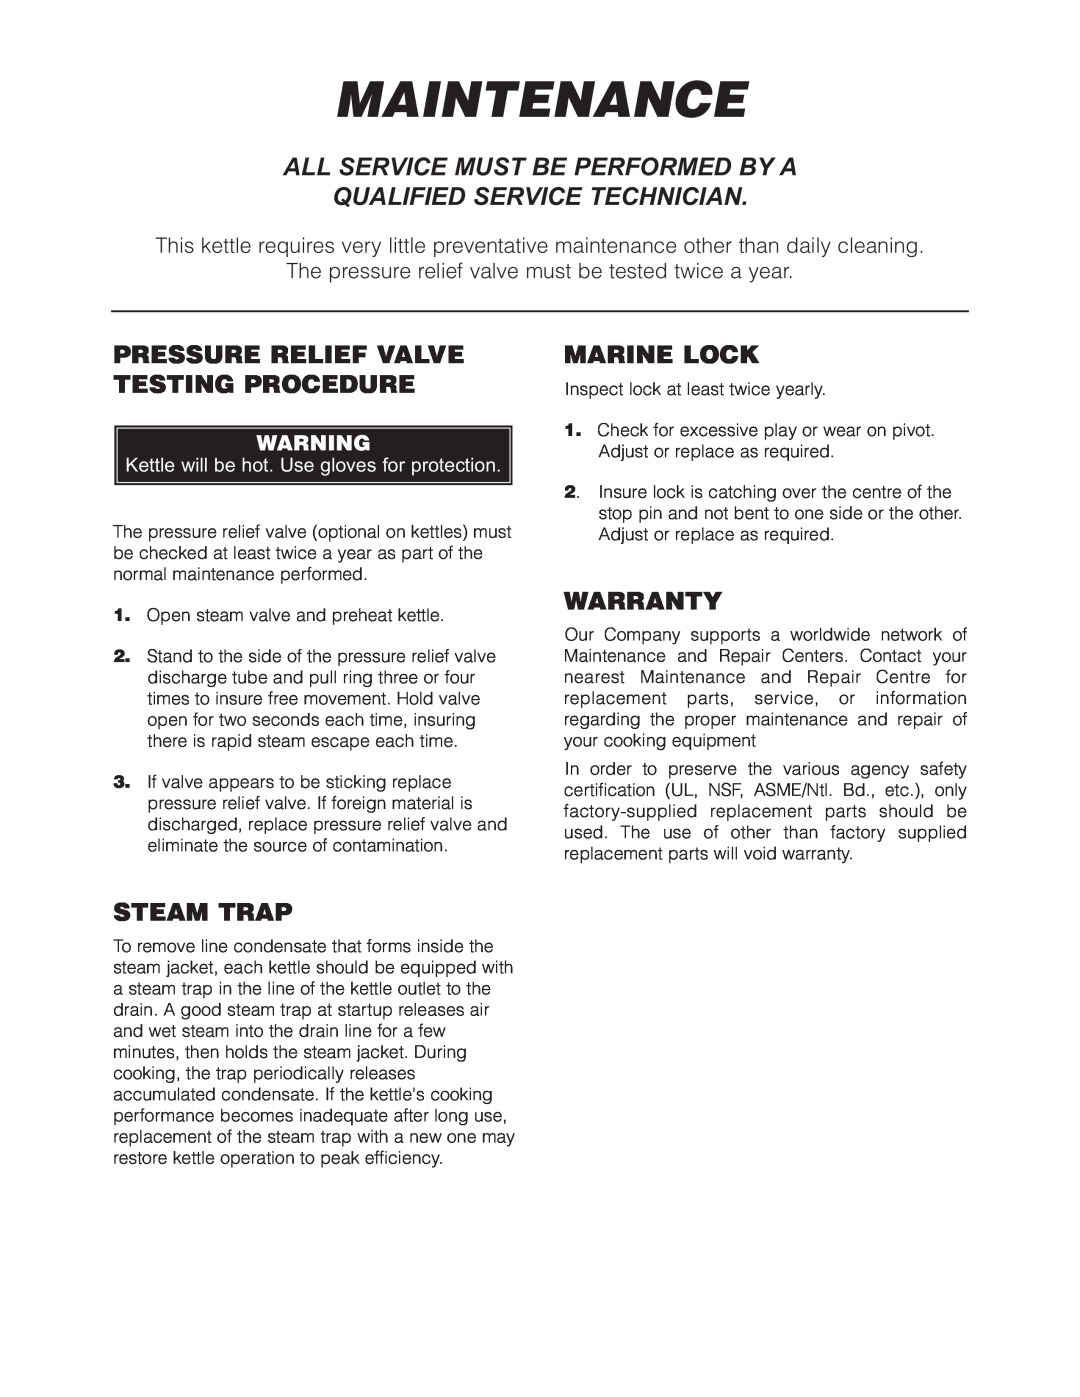 Cleveland Range SD-1600-K2020 Maintenance, All Service Must Be Performed By A Qualified Service Technician, Marine Lock 